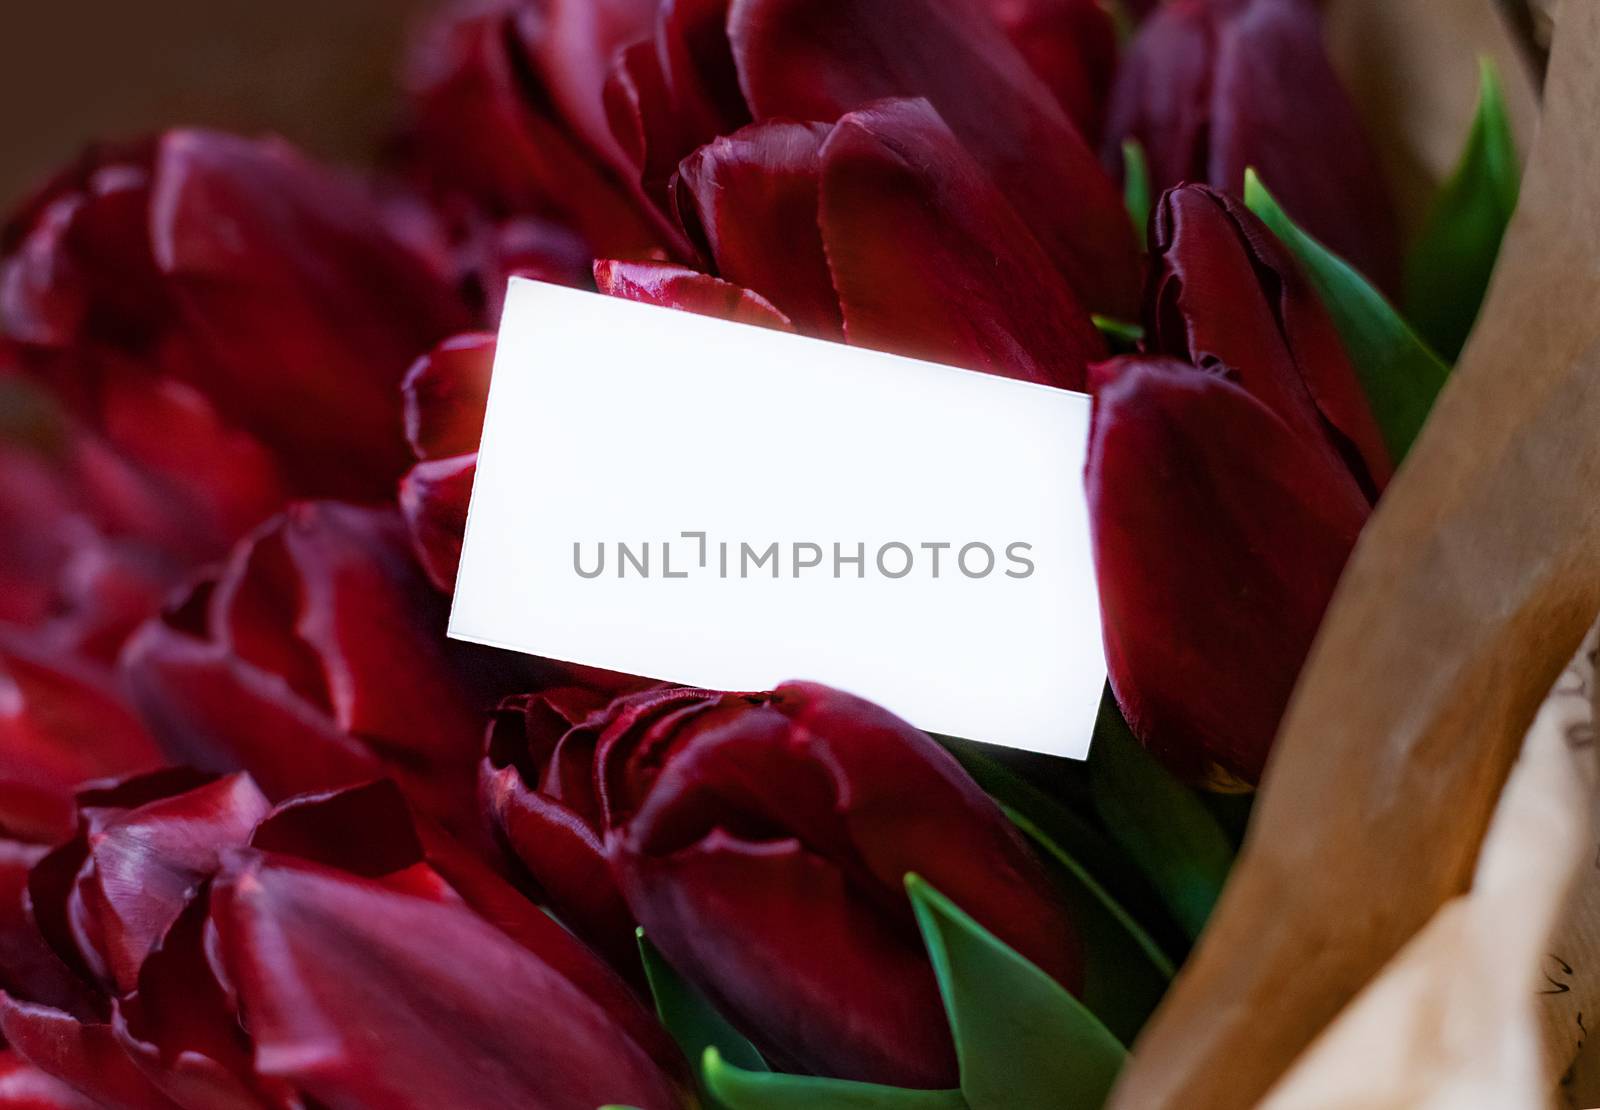 Holiday greeting card among deep red tulip bouquet